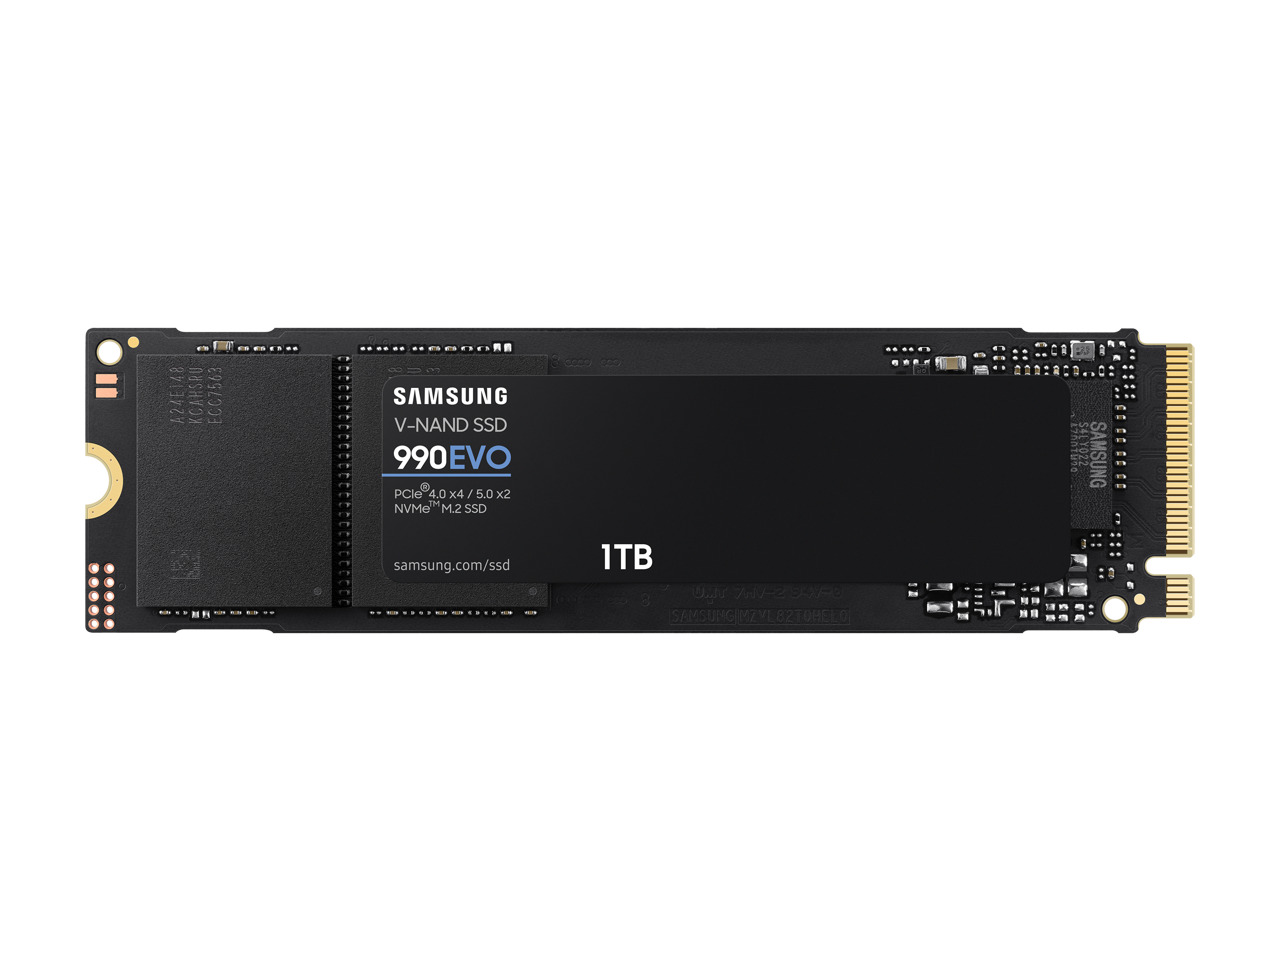 SAMSUNG 1TB 990 EVO SSD - PCIe 5.0 M.2 2280 Solid State Drive, Up-to 5,000MB/s